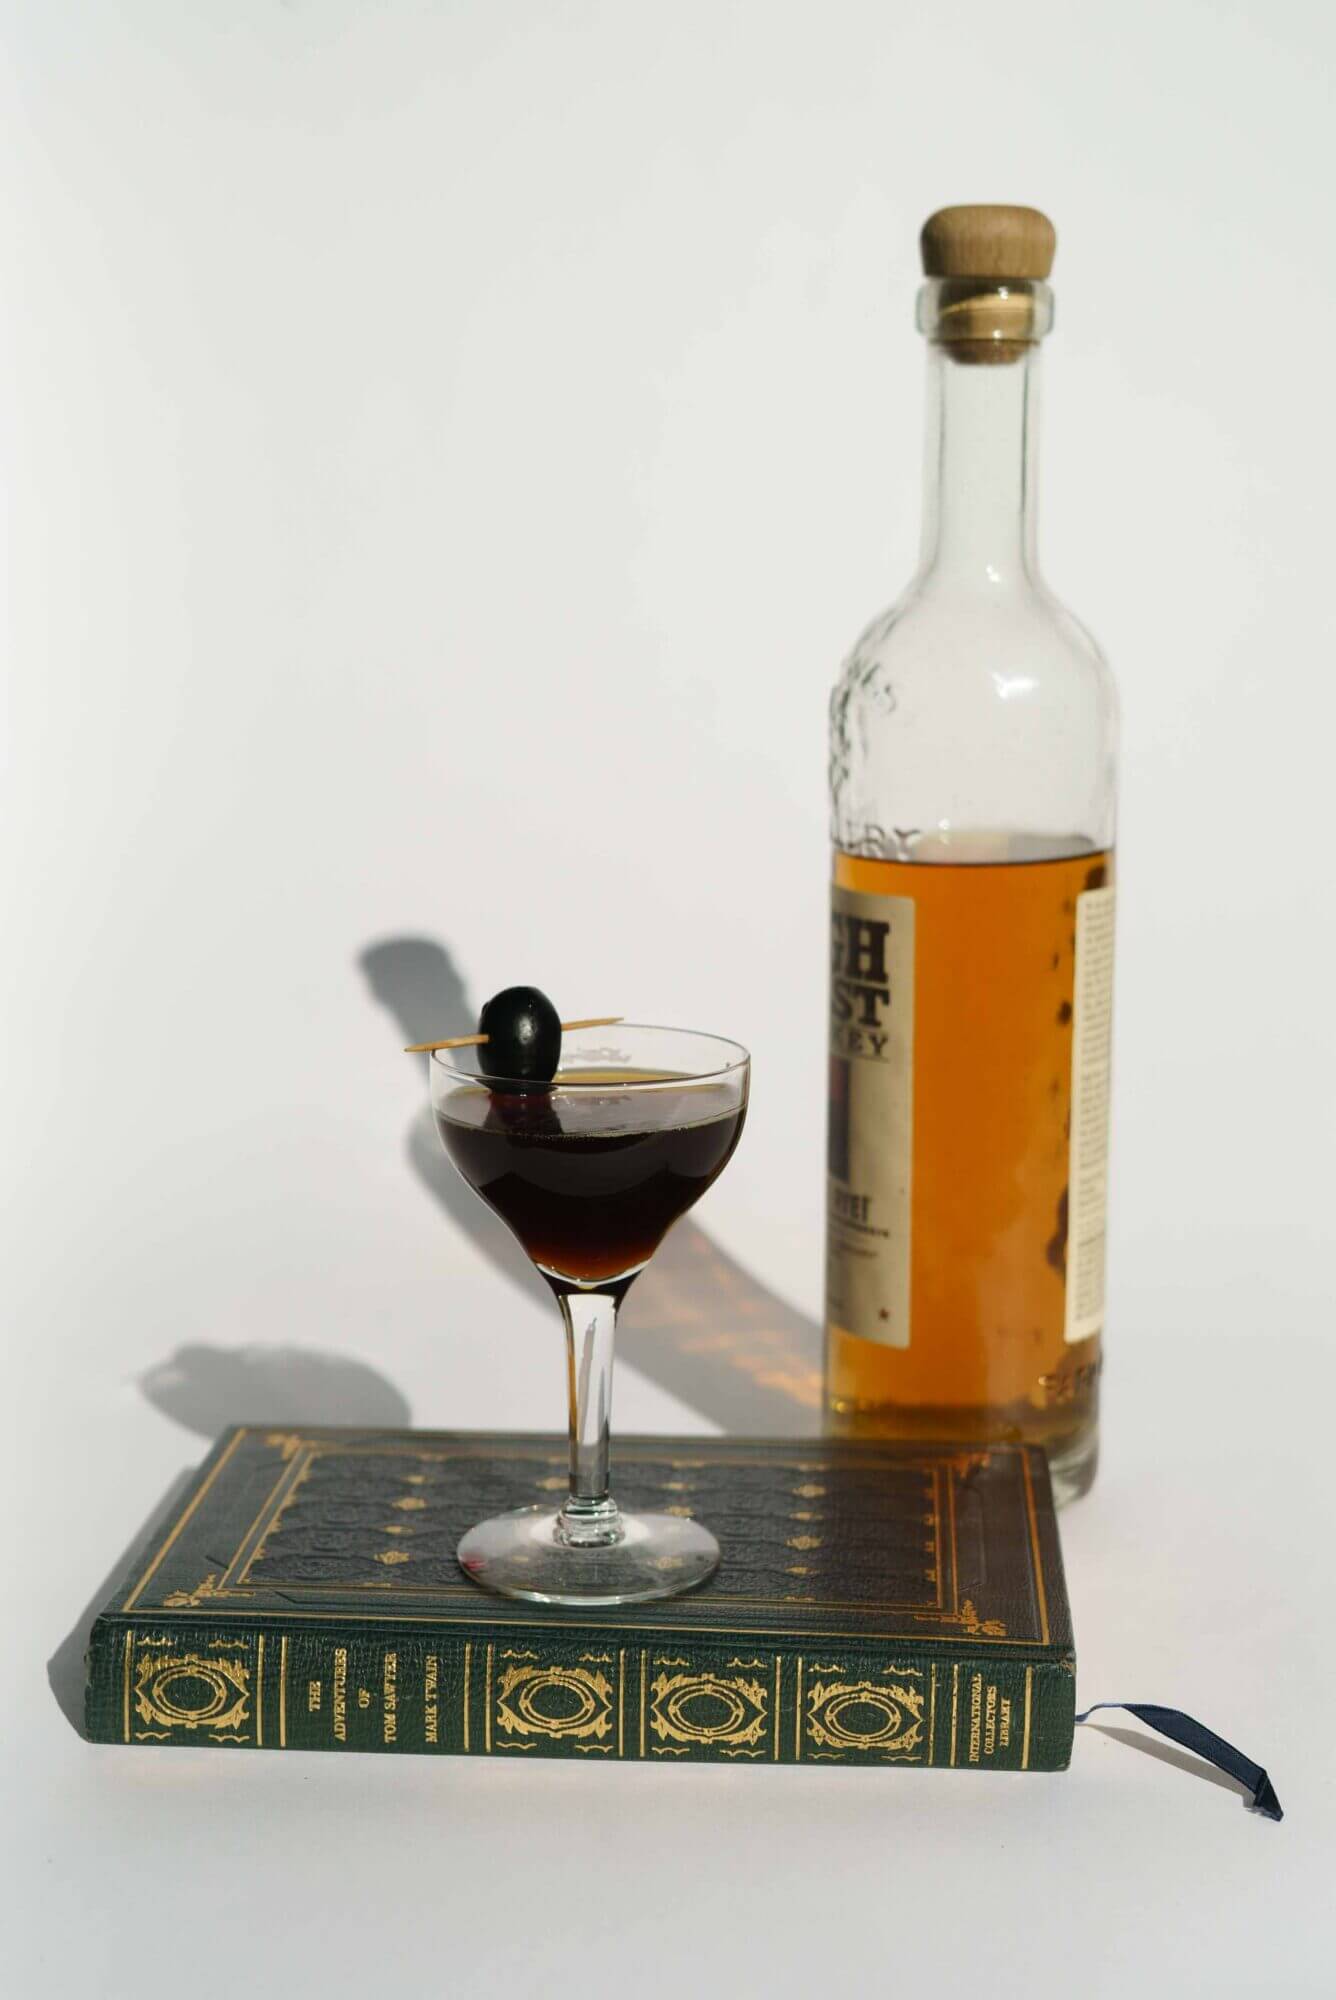 A bottle of bourbon sits on top of a book.